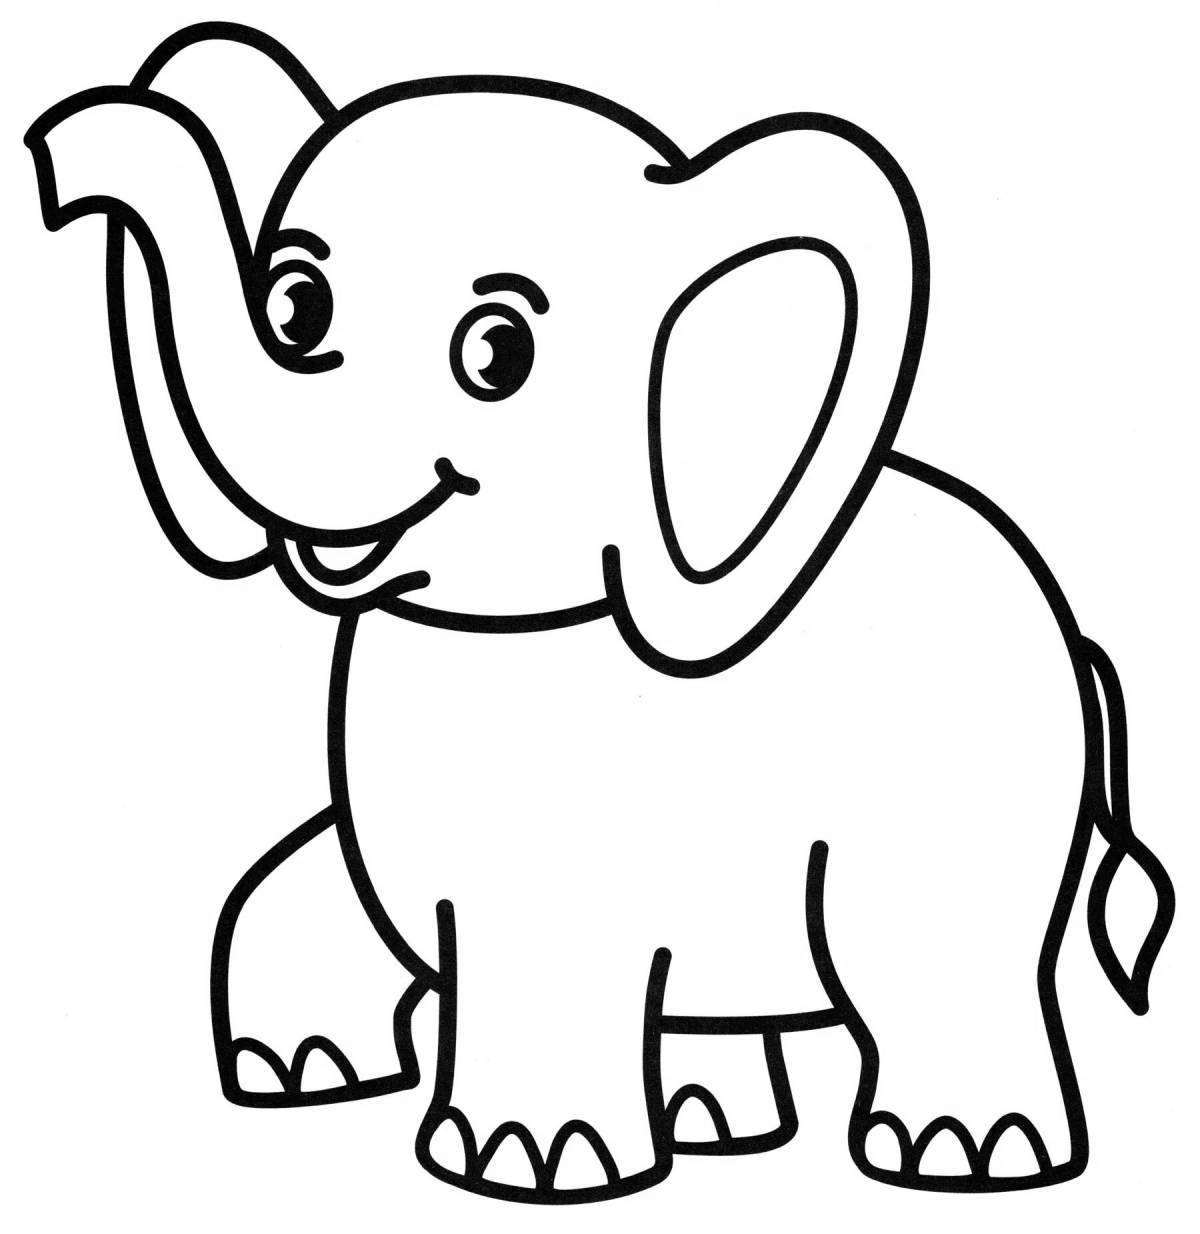 Adorable elephant coloring book for 7 year olds